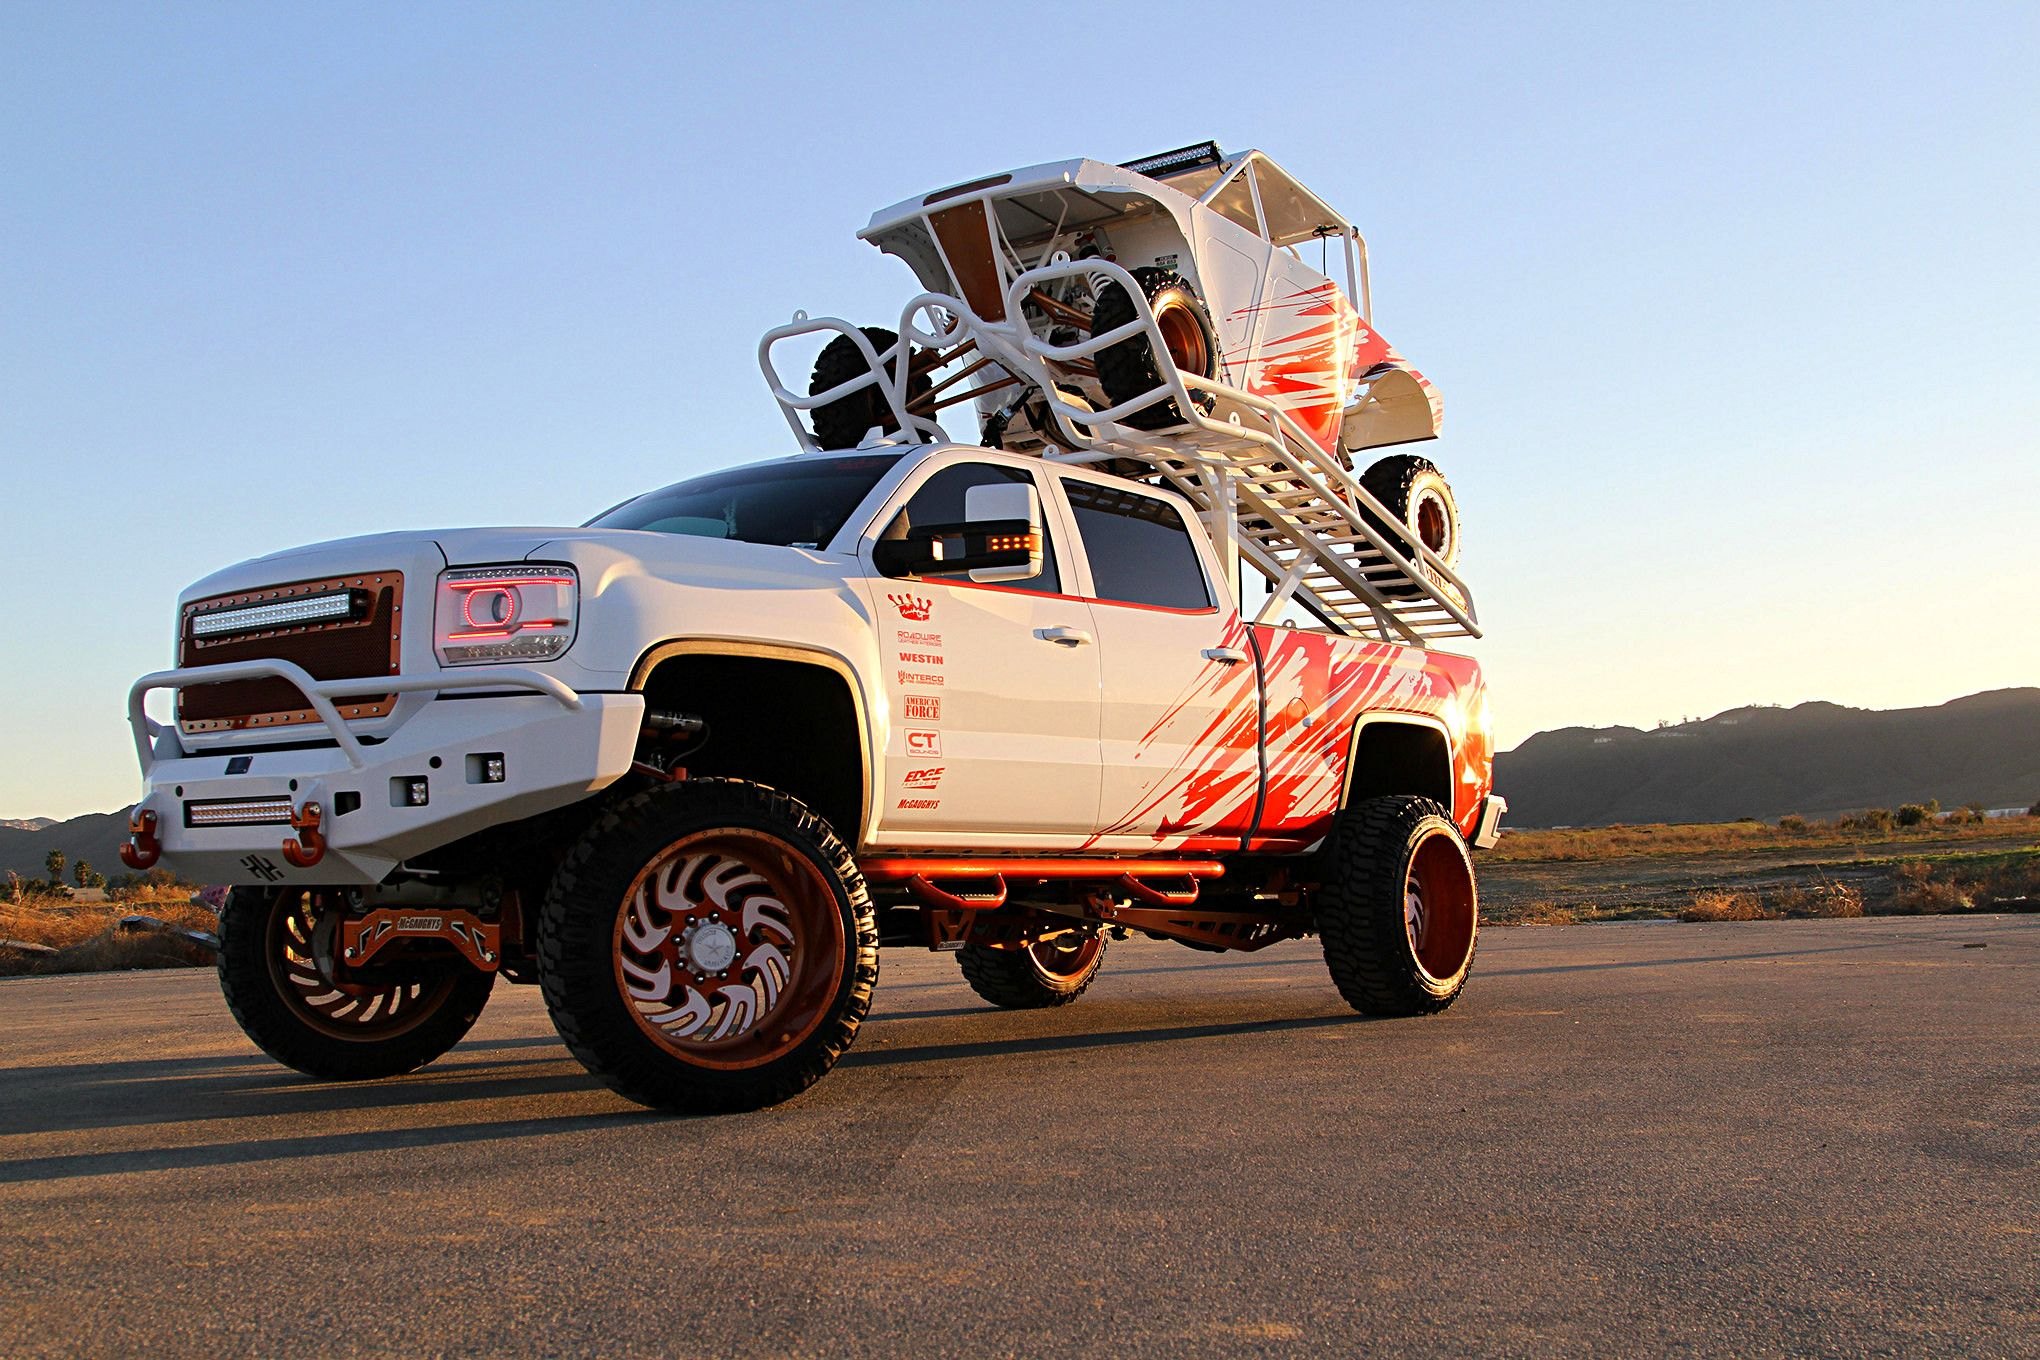 Winner combo - Lifted GMC Sierra + Colormatched UTV - Photo by Mike Alexander